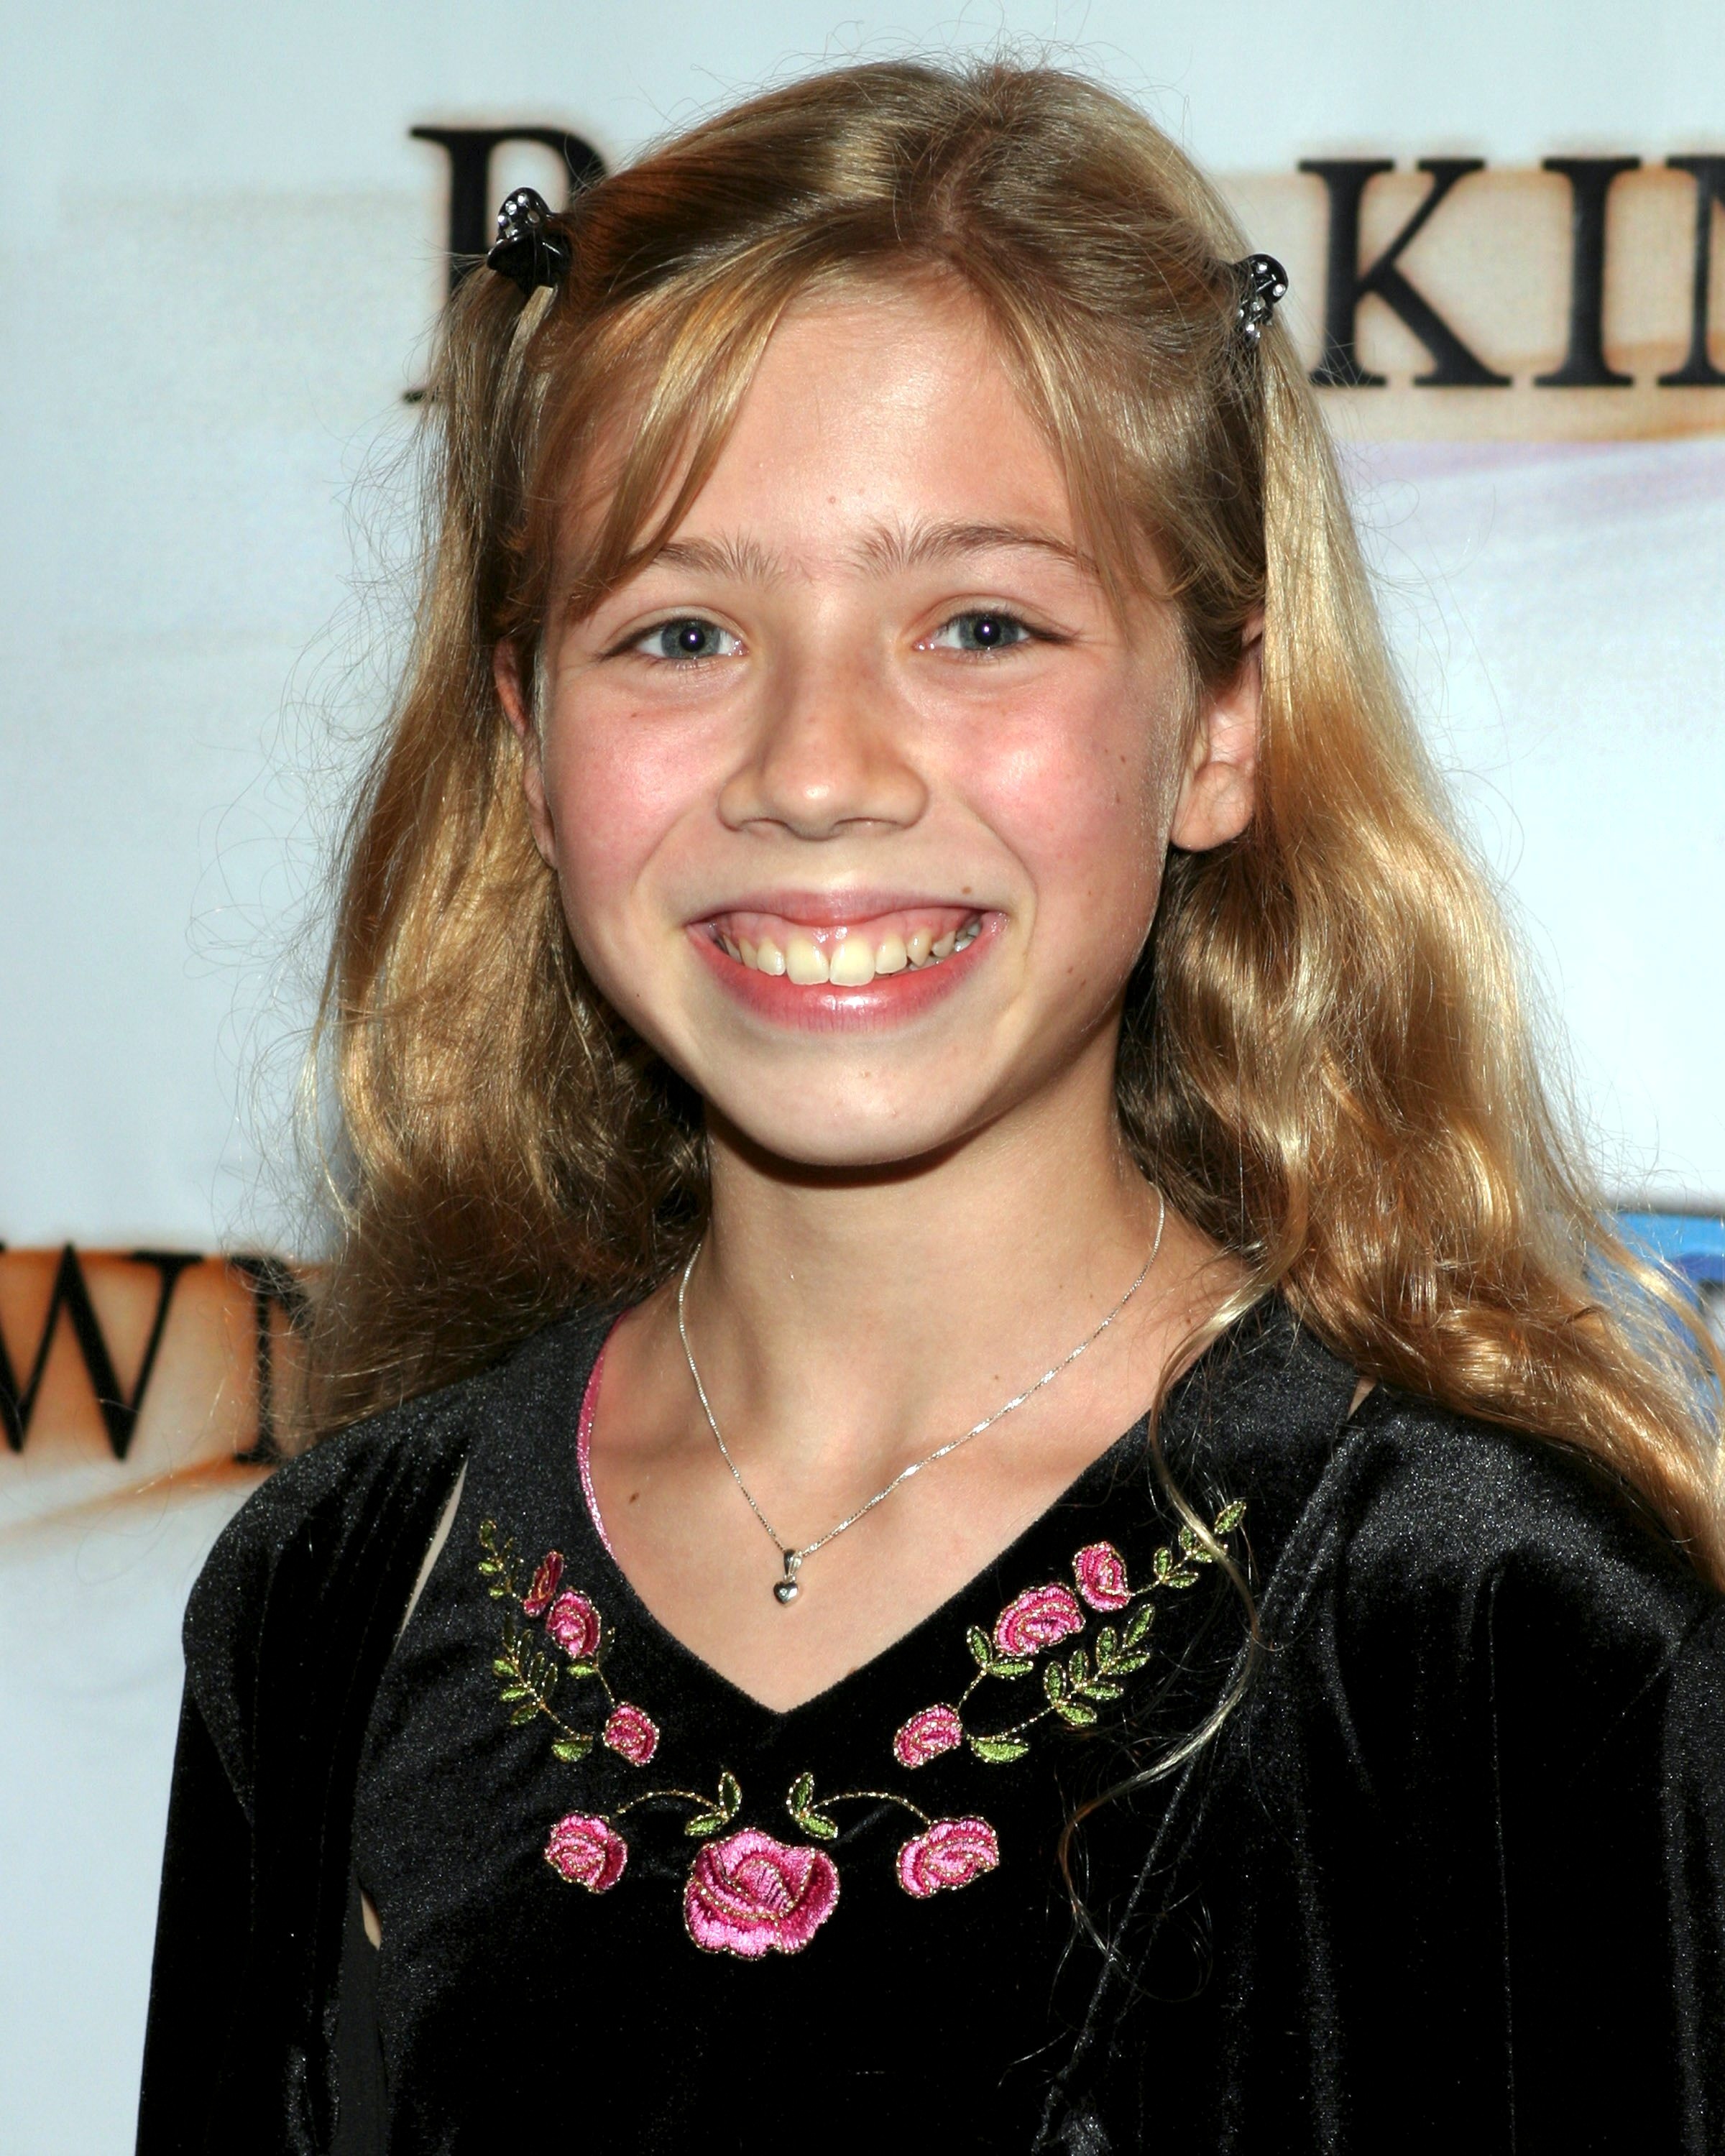 Jennette McCurdy attends the "Breaking Dawn" premiere on October 17, 2004 | Source: Getty Images